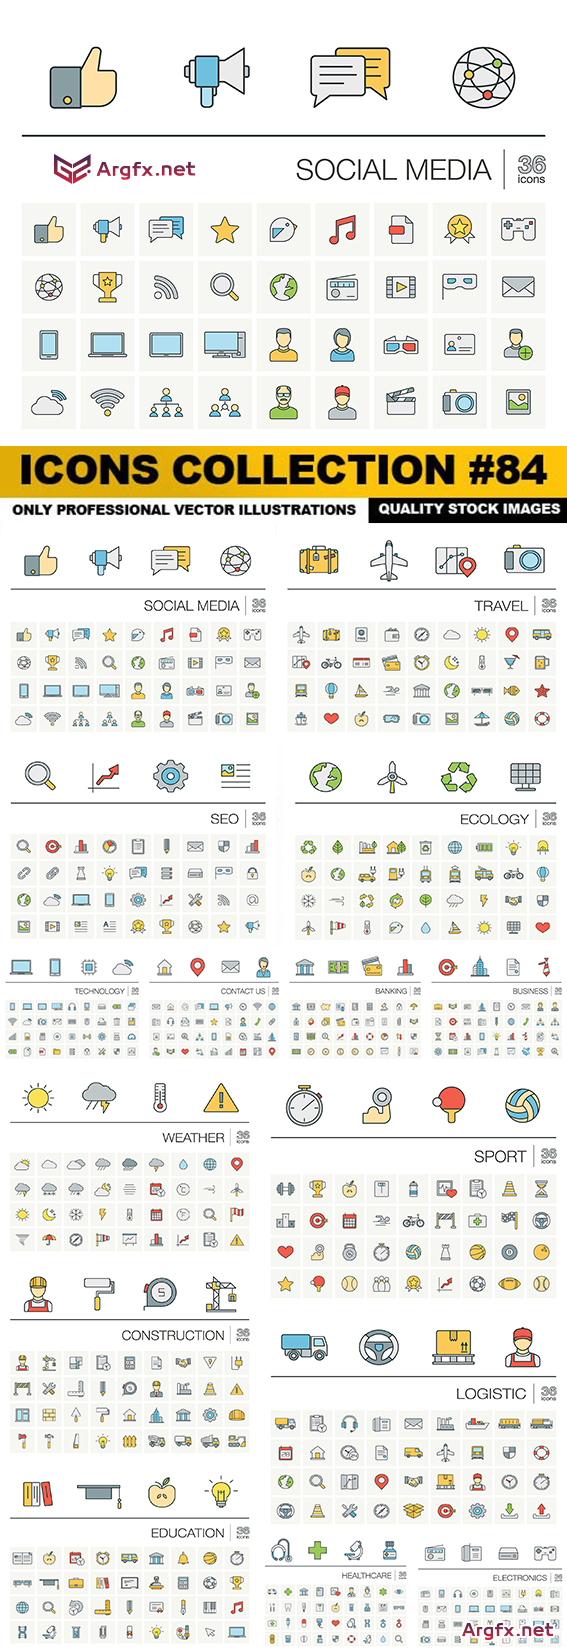 Icons Collection #84 - 15 Vector